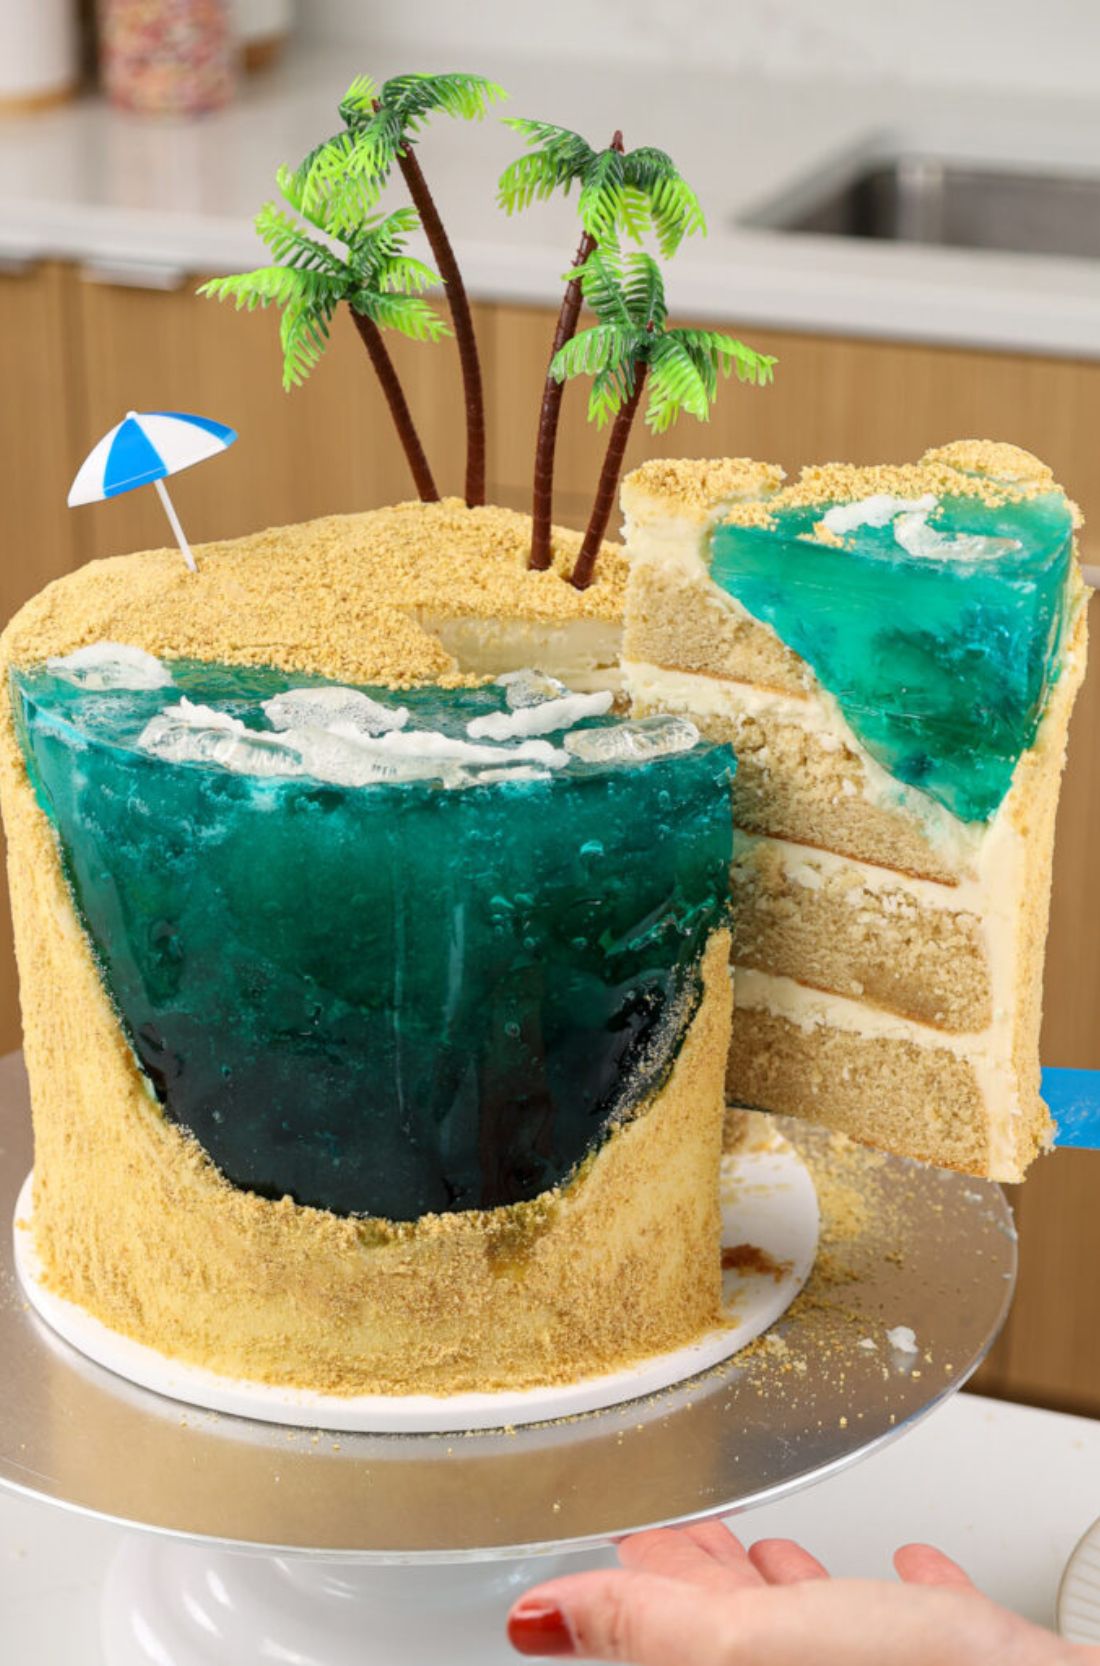 Beach Cake: A visually stunning creation with blue-tinted frosting, edible seashells, and a sandy beach base. Perfect for seaside celebrations and tropical indulgence.